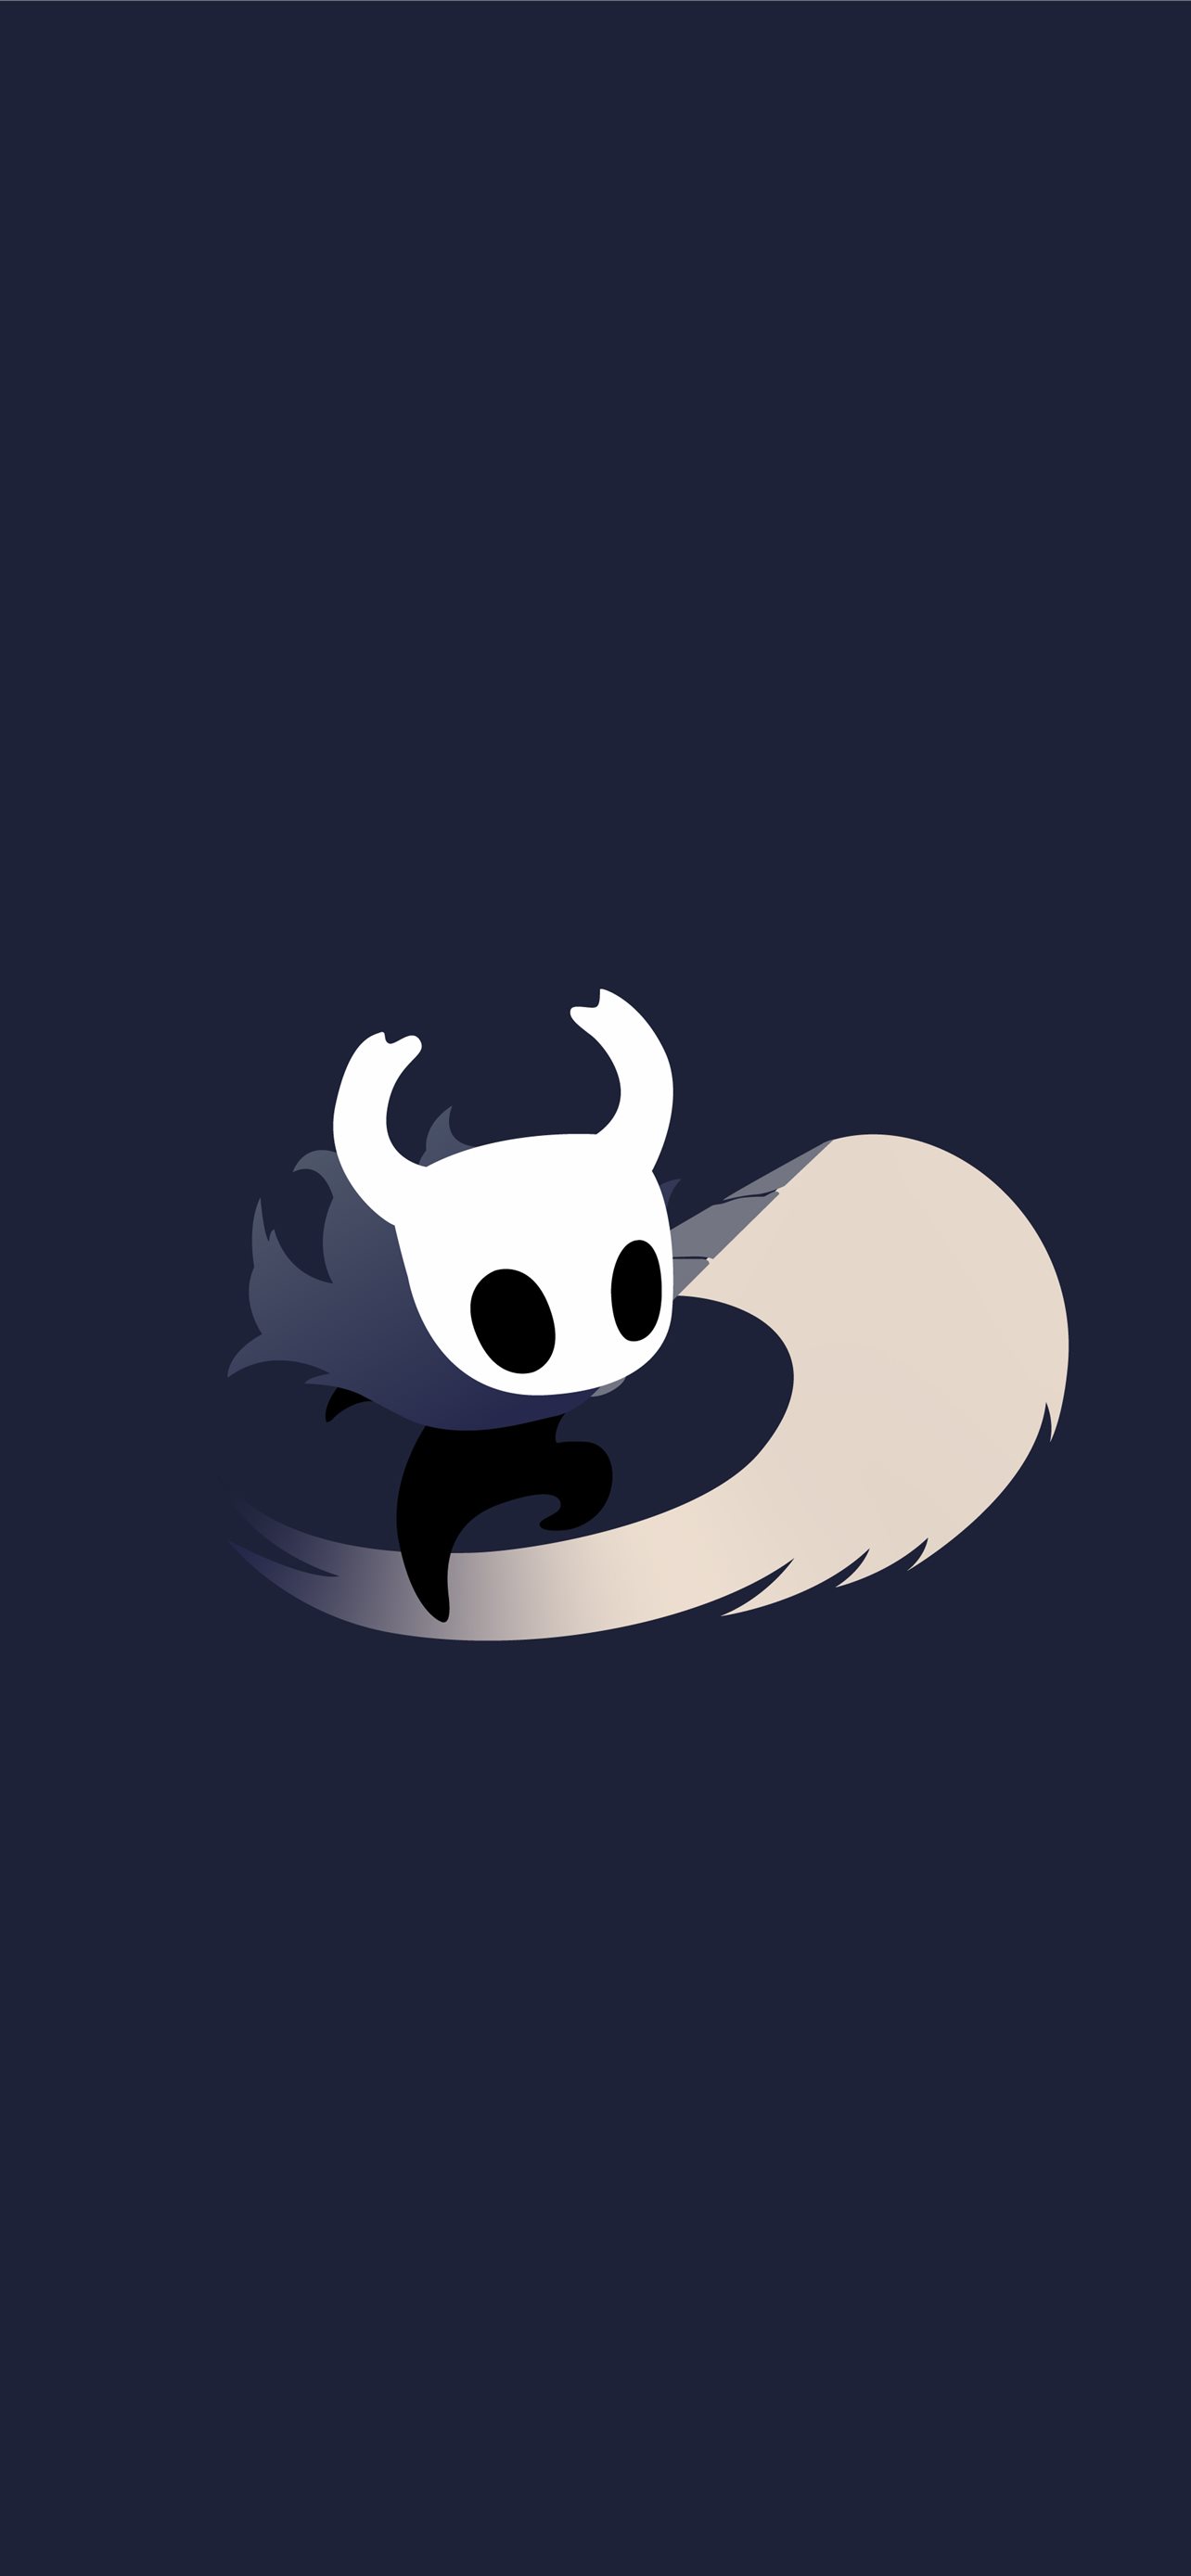 Hollow Knight Wallpapers  TrumpWallpapers